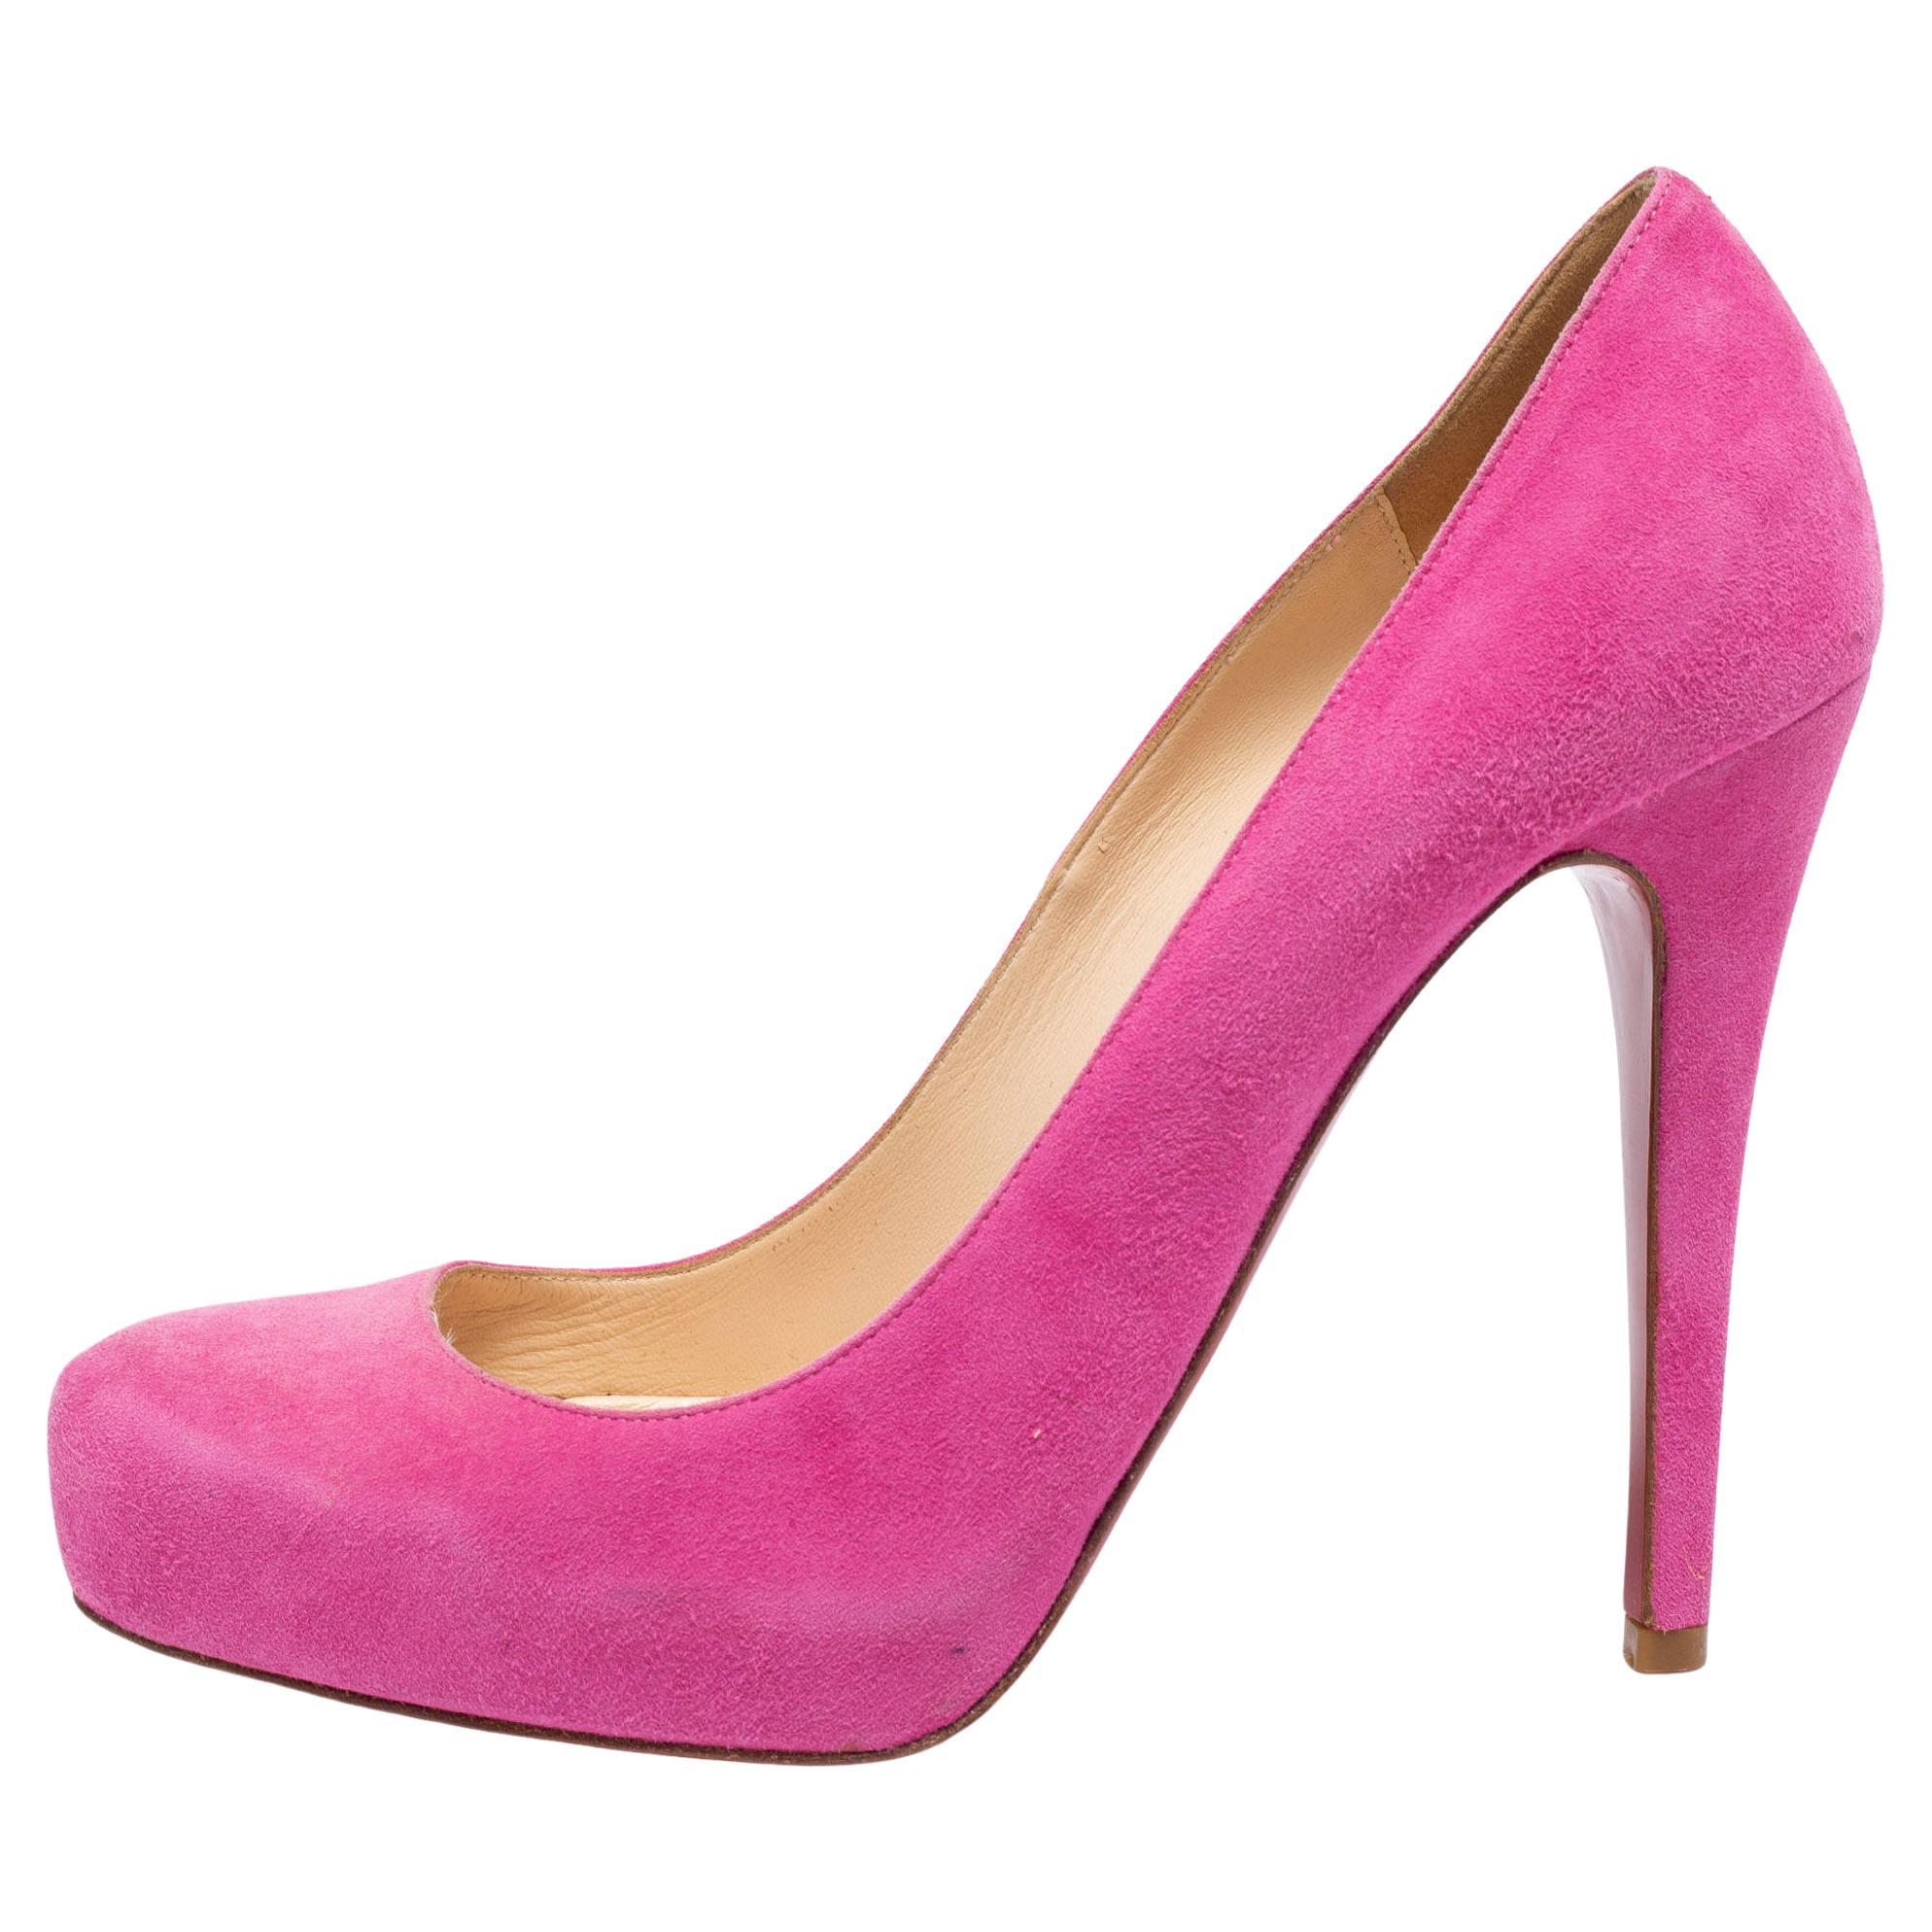 Christian Louboutin Pink Suede Elisa Pumps Size 38.5 For Sale